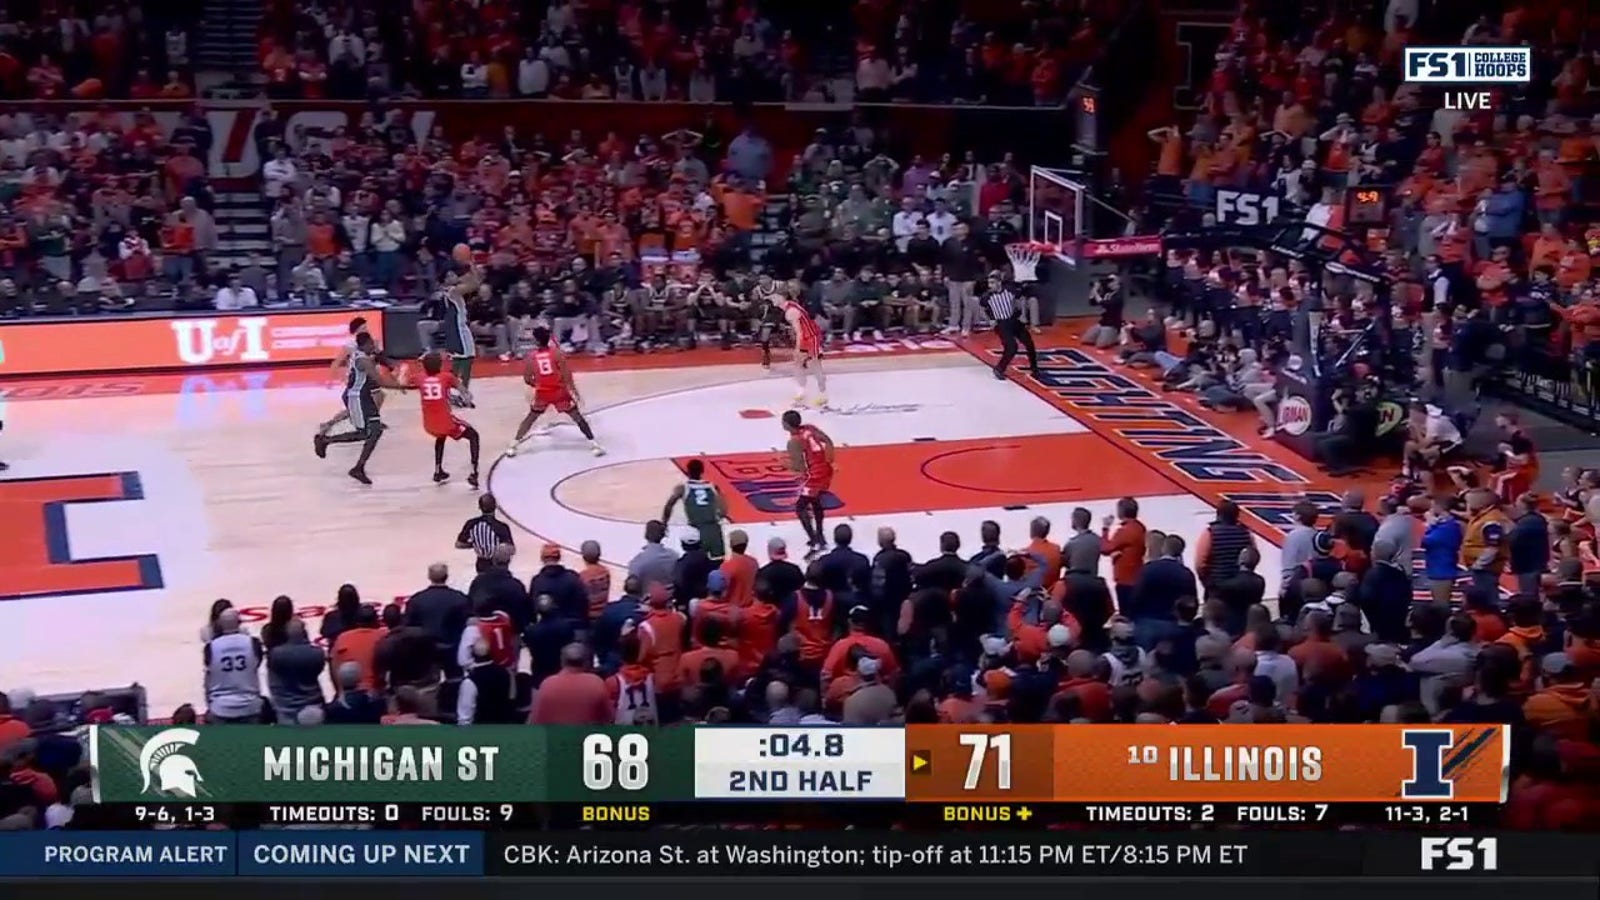 Illinois' defense holds strong on back-to-back possessions in narrow 71-68 victory over Michigan State